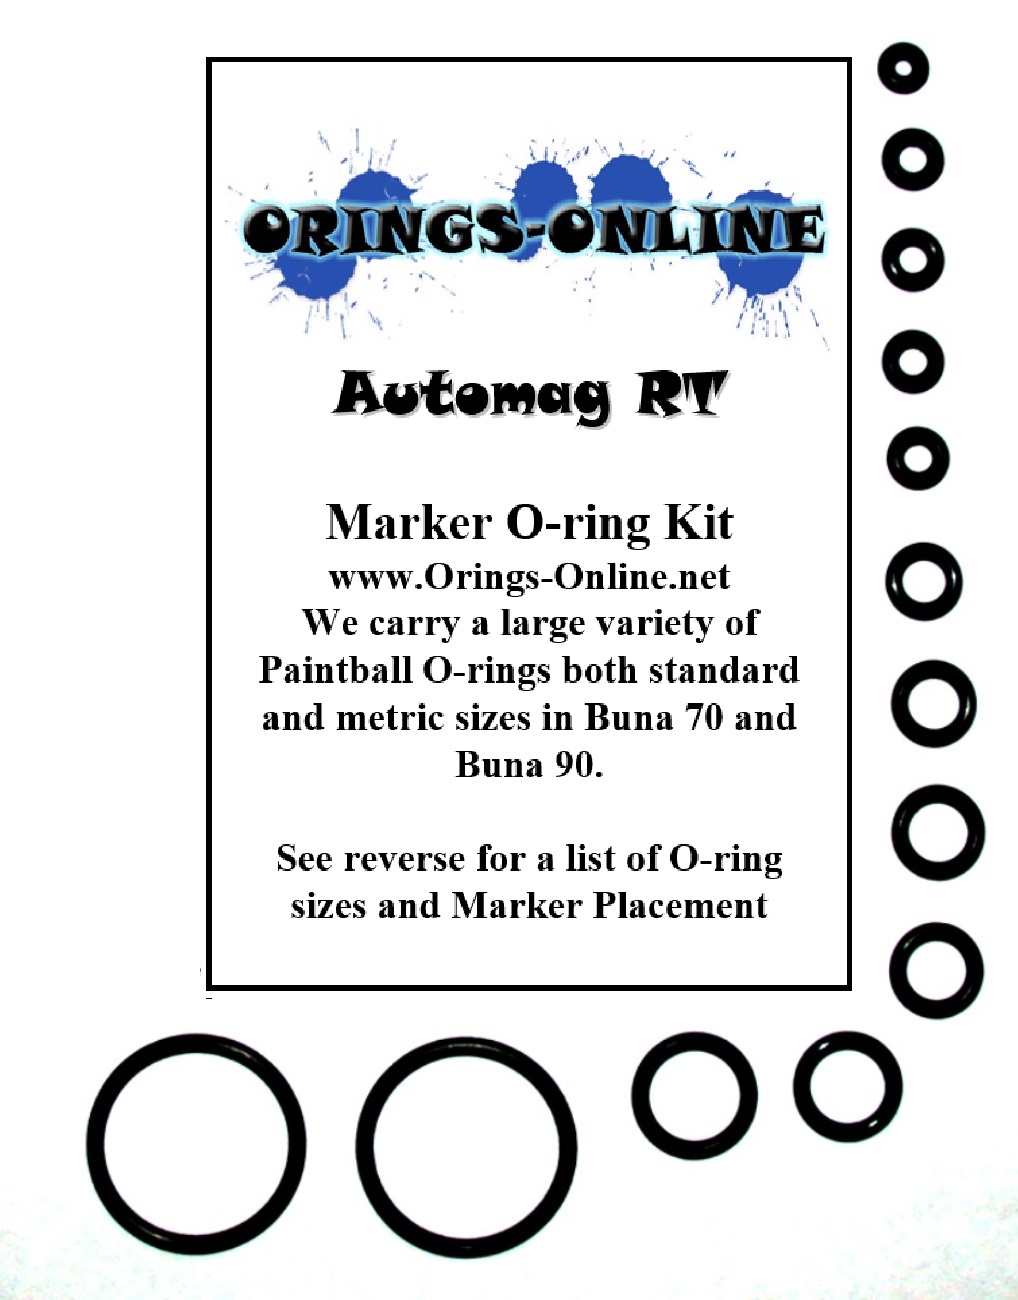 Automag RT Marker O-ring Kit